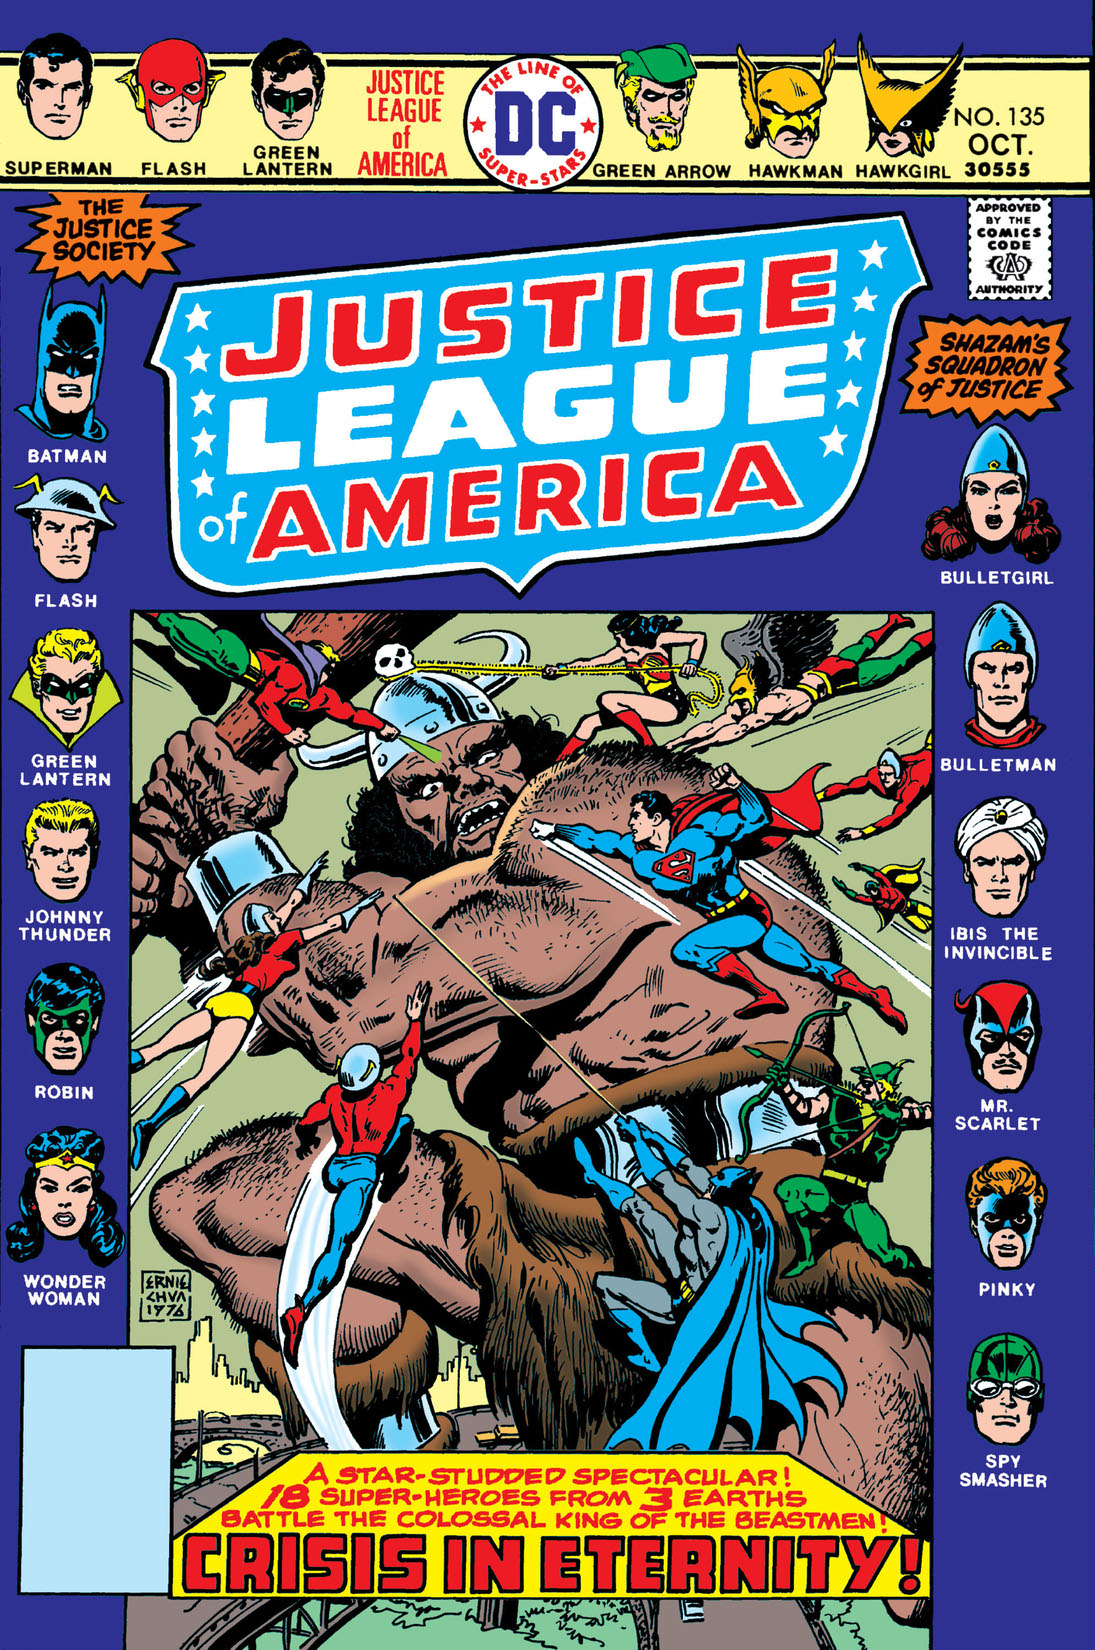 Justice League of America (1960-) #135 preview images